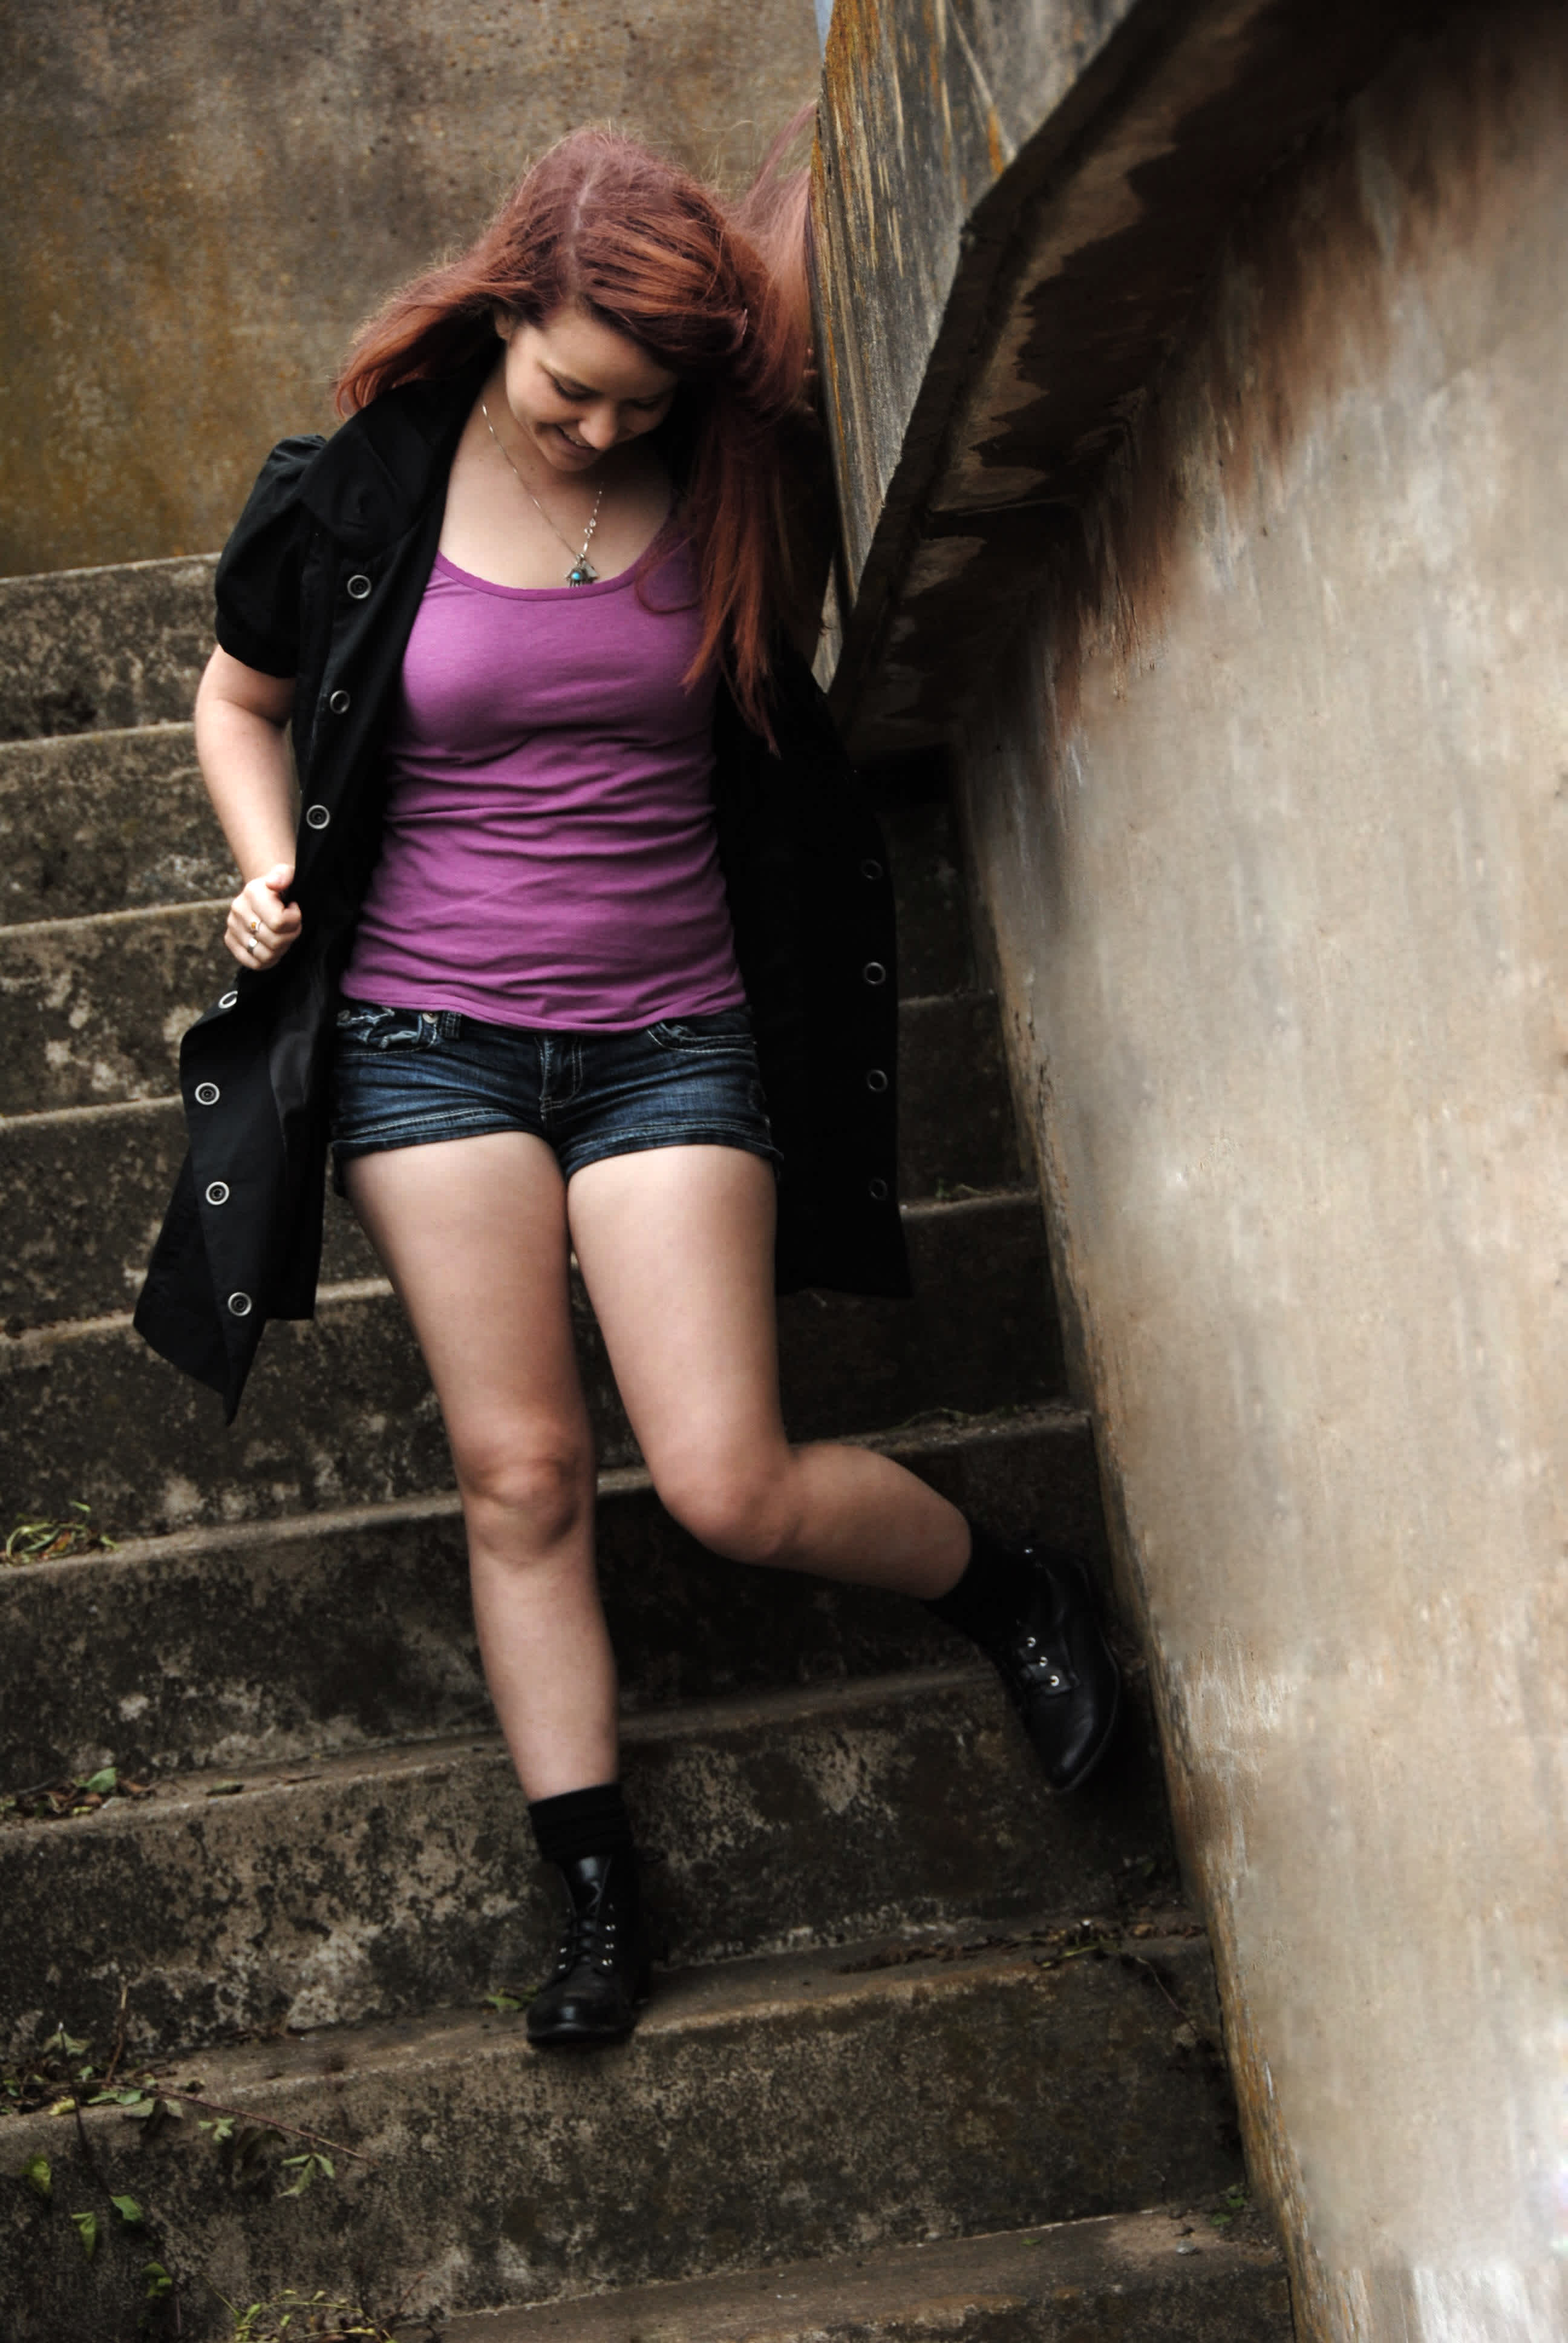 Girl walking down a stairwell.